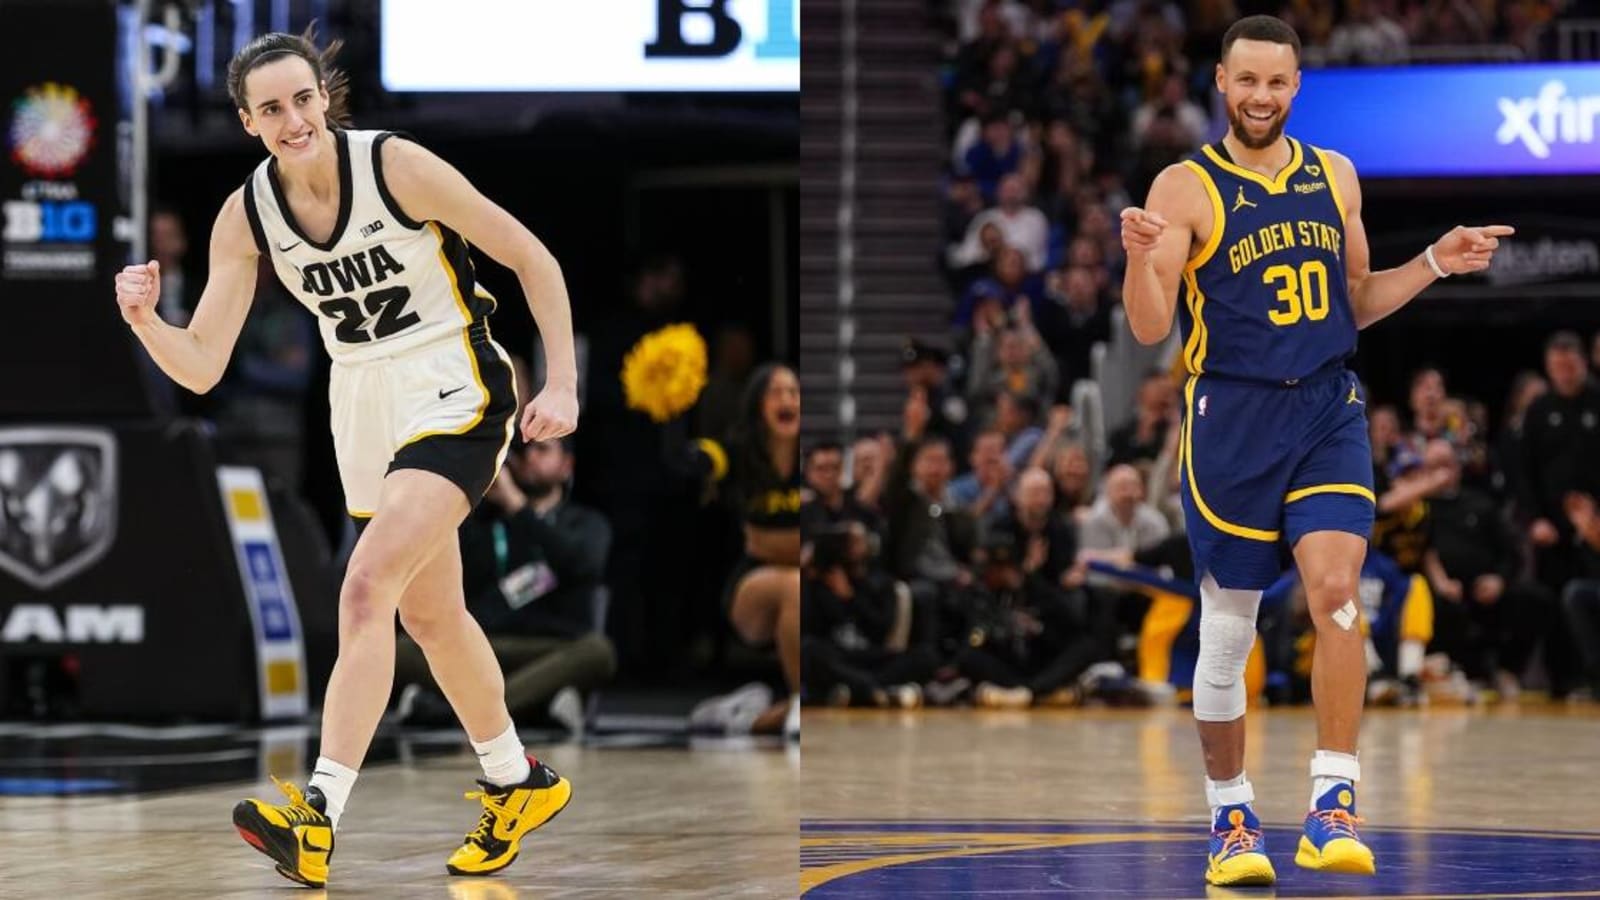 Steph Curry praises Iowa’s Caitlin Clark, dismisses comparison because it ‘robs her of the rest of her game’